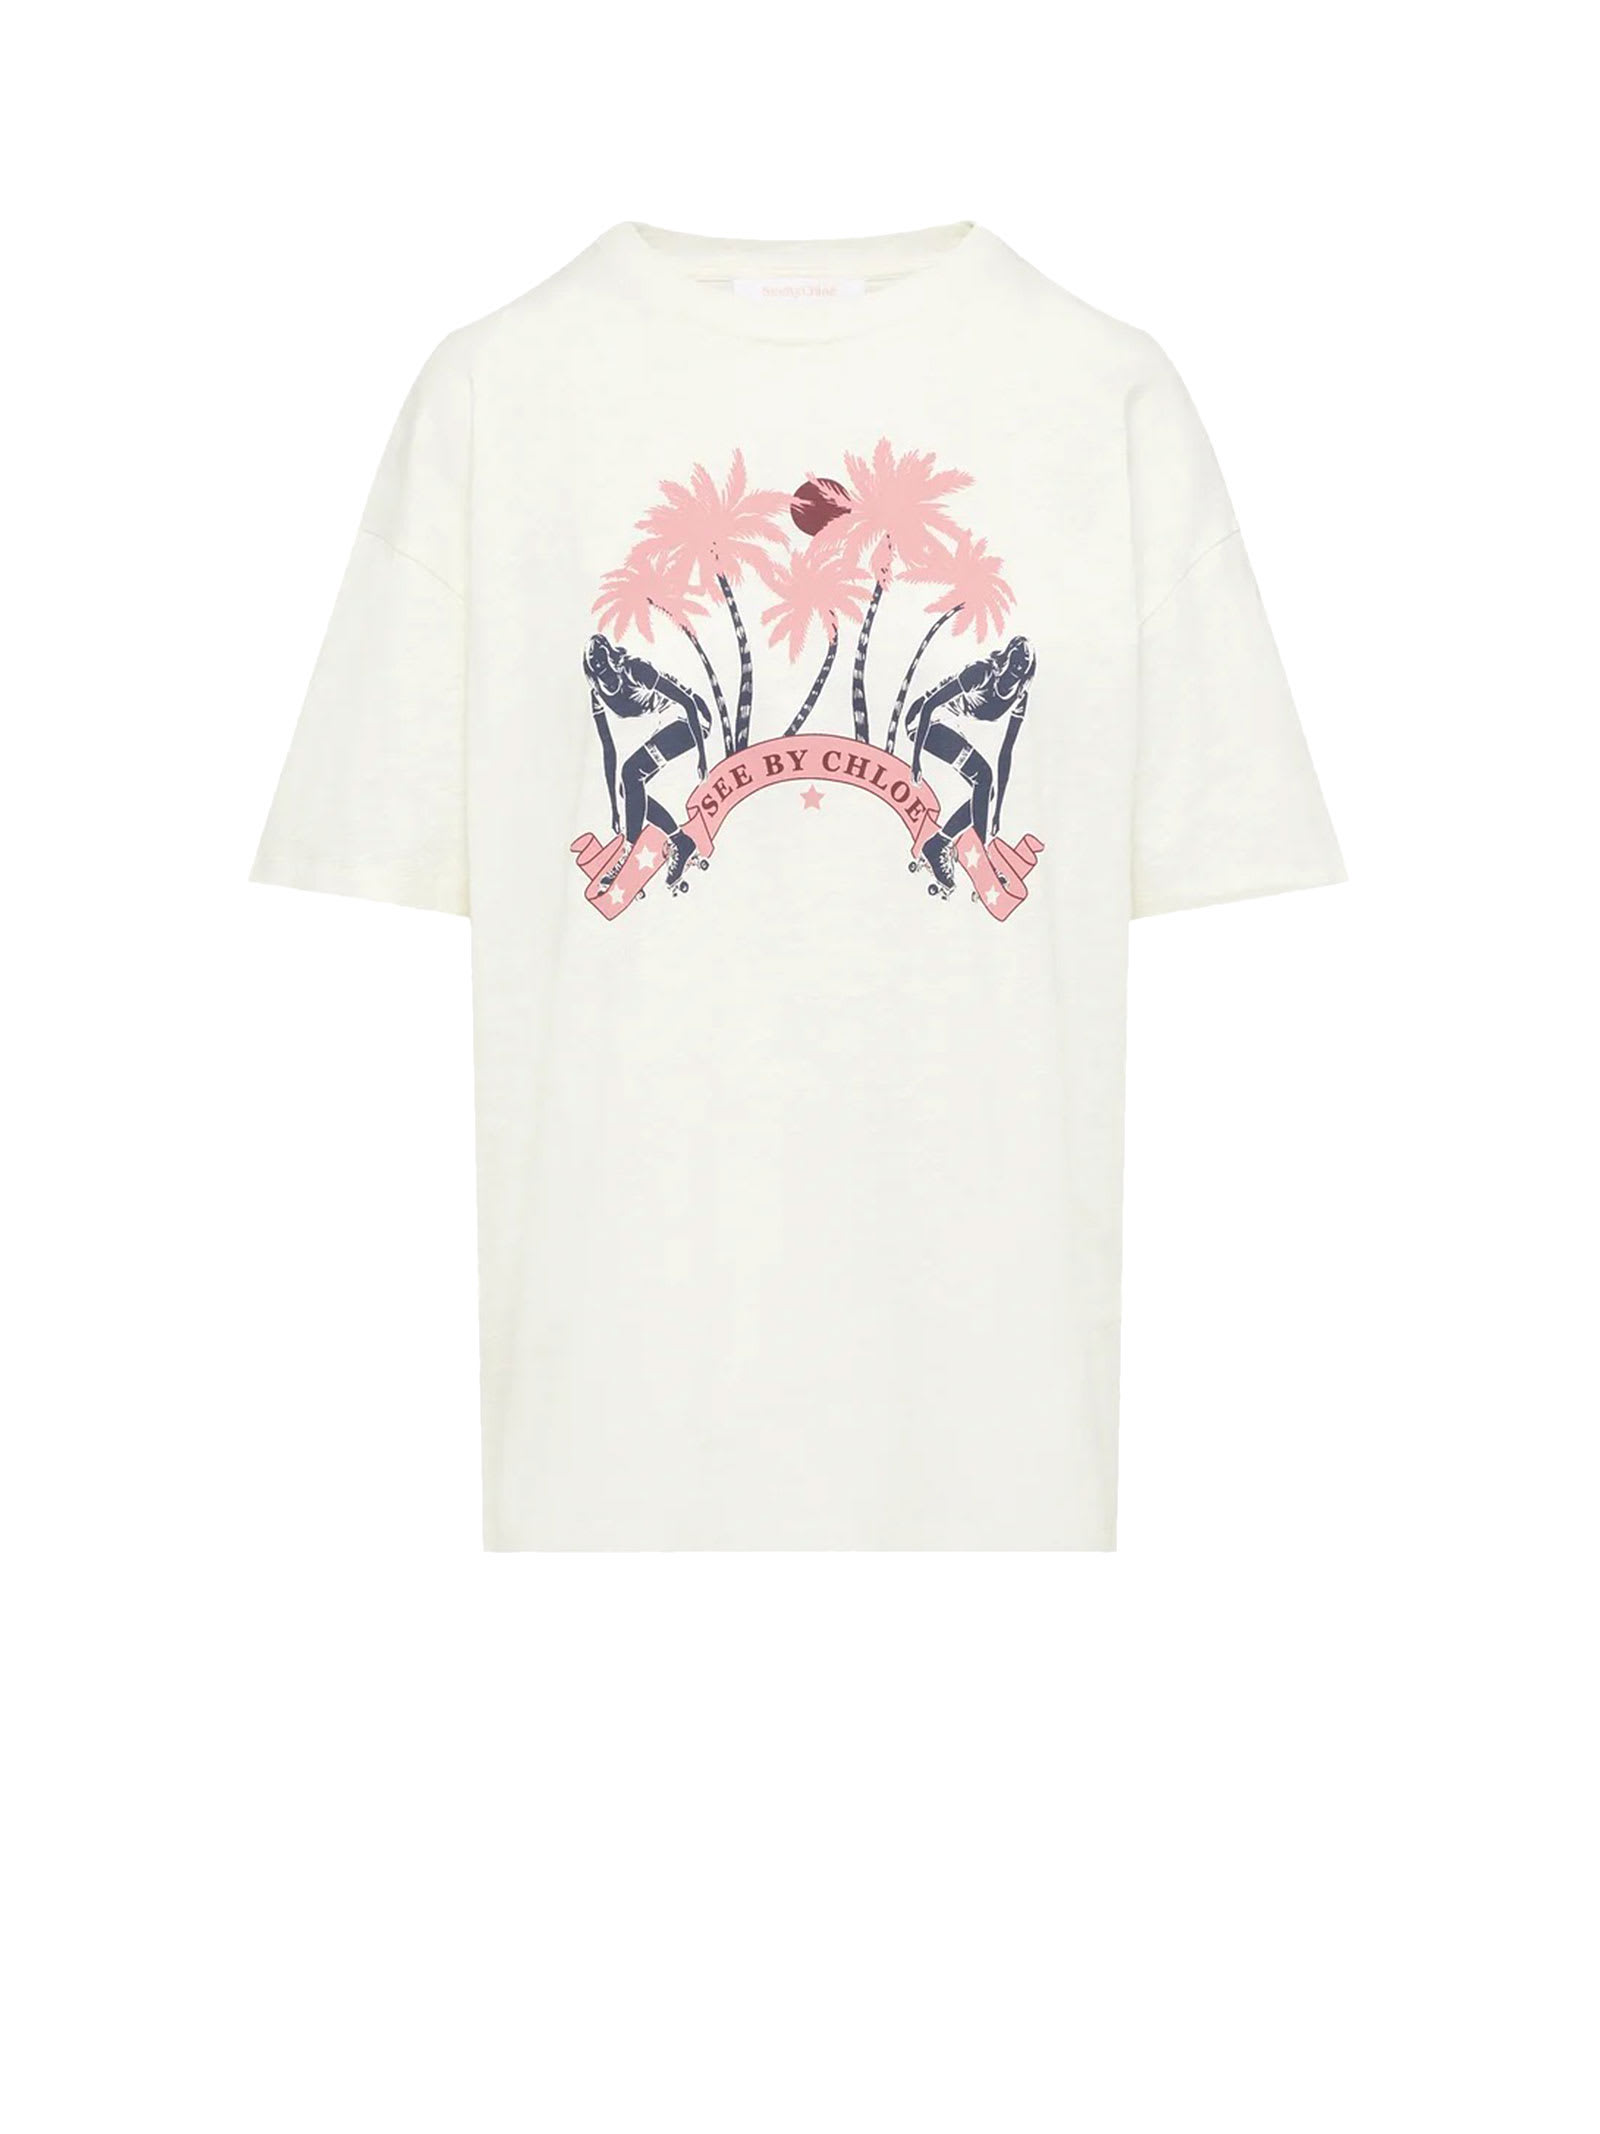 SEE BY CHLOÉ T-SHIRT WITH PALM TREE AND LOGO PRINT